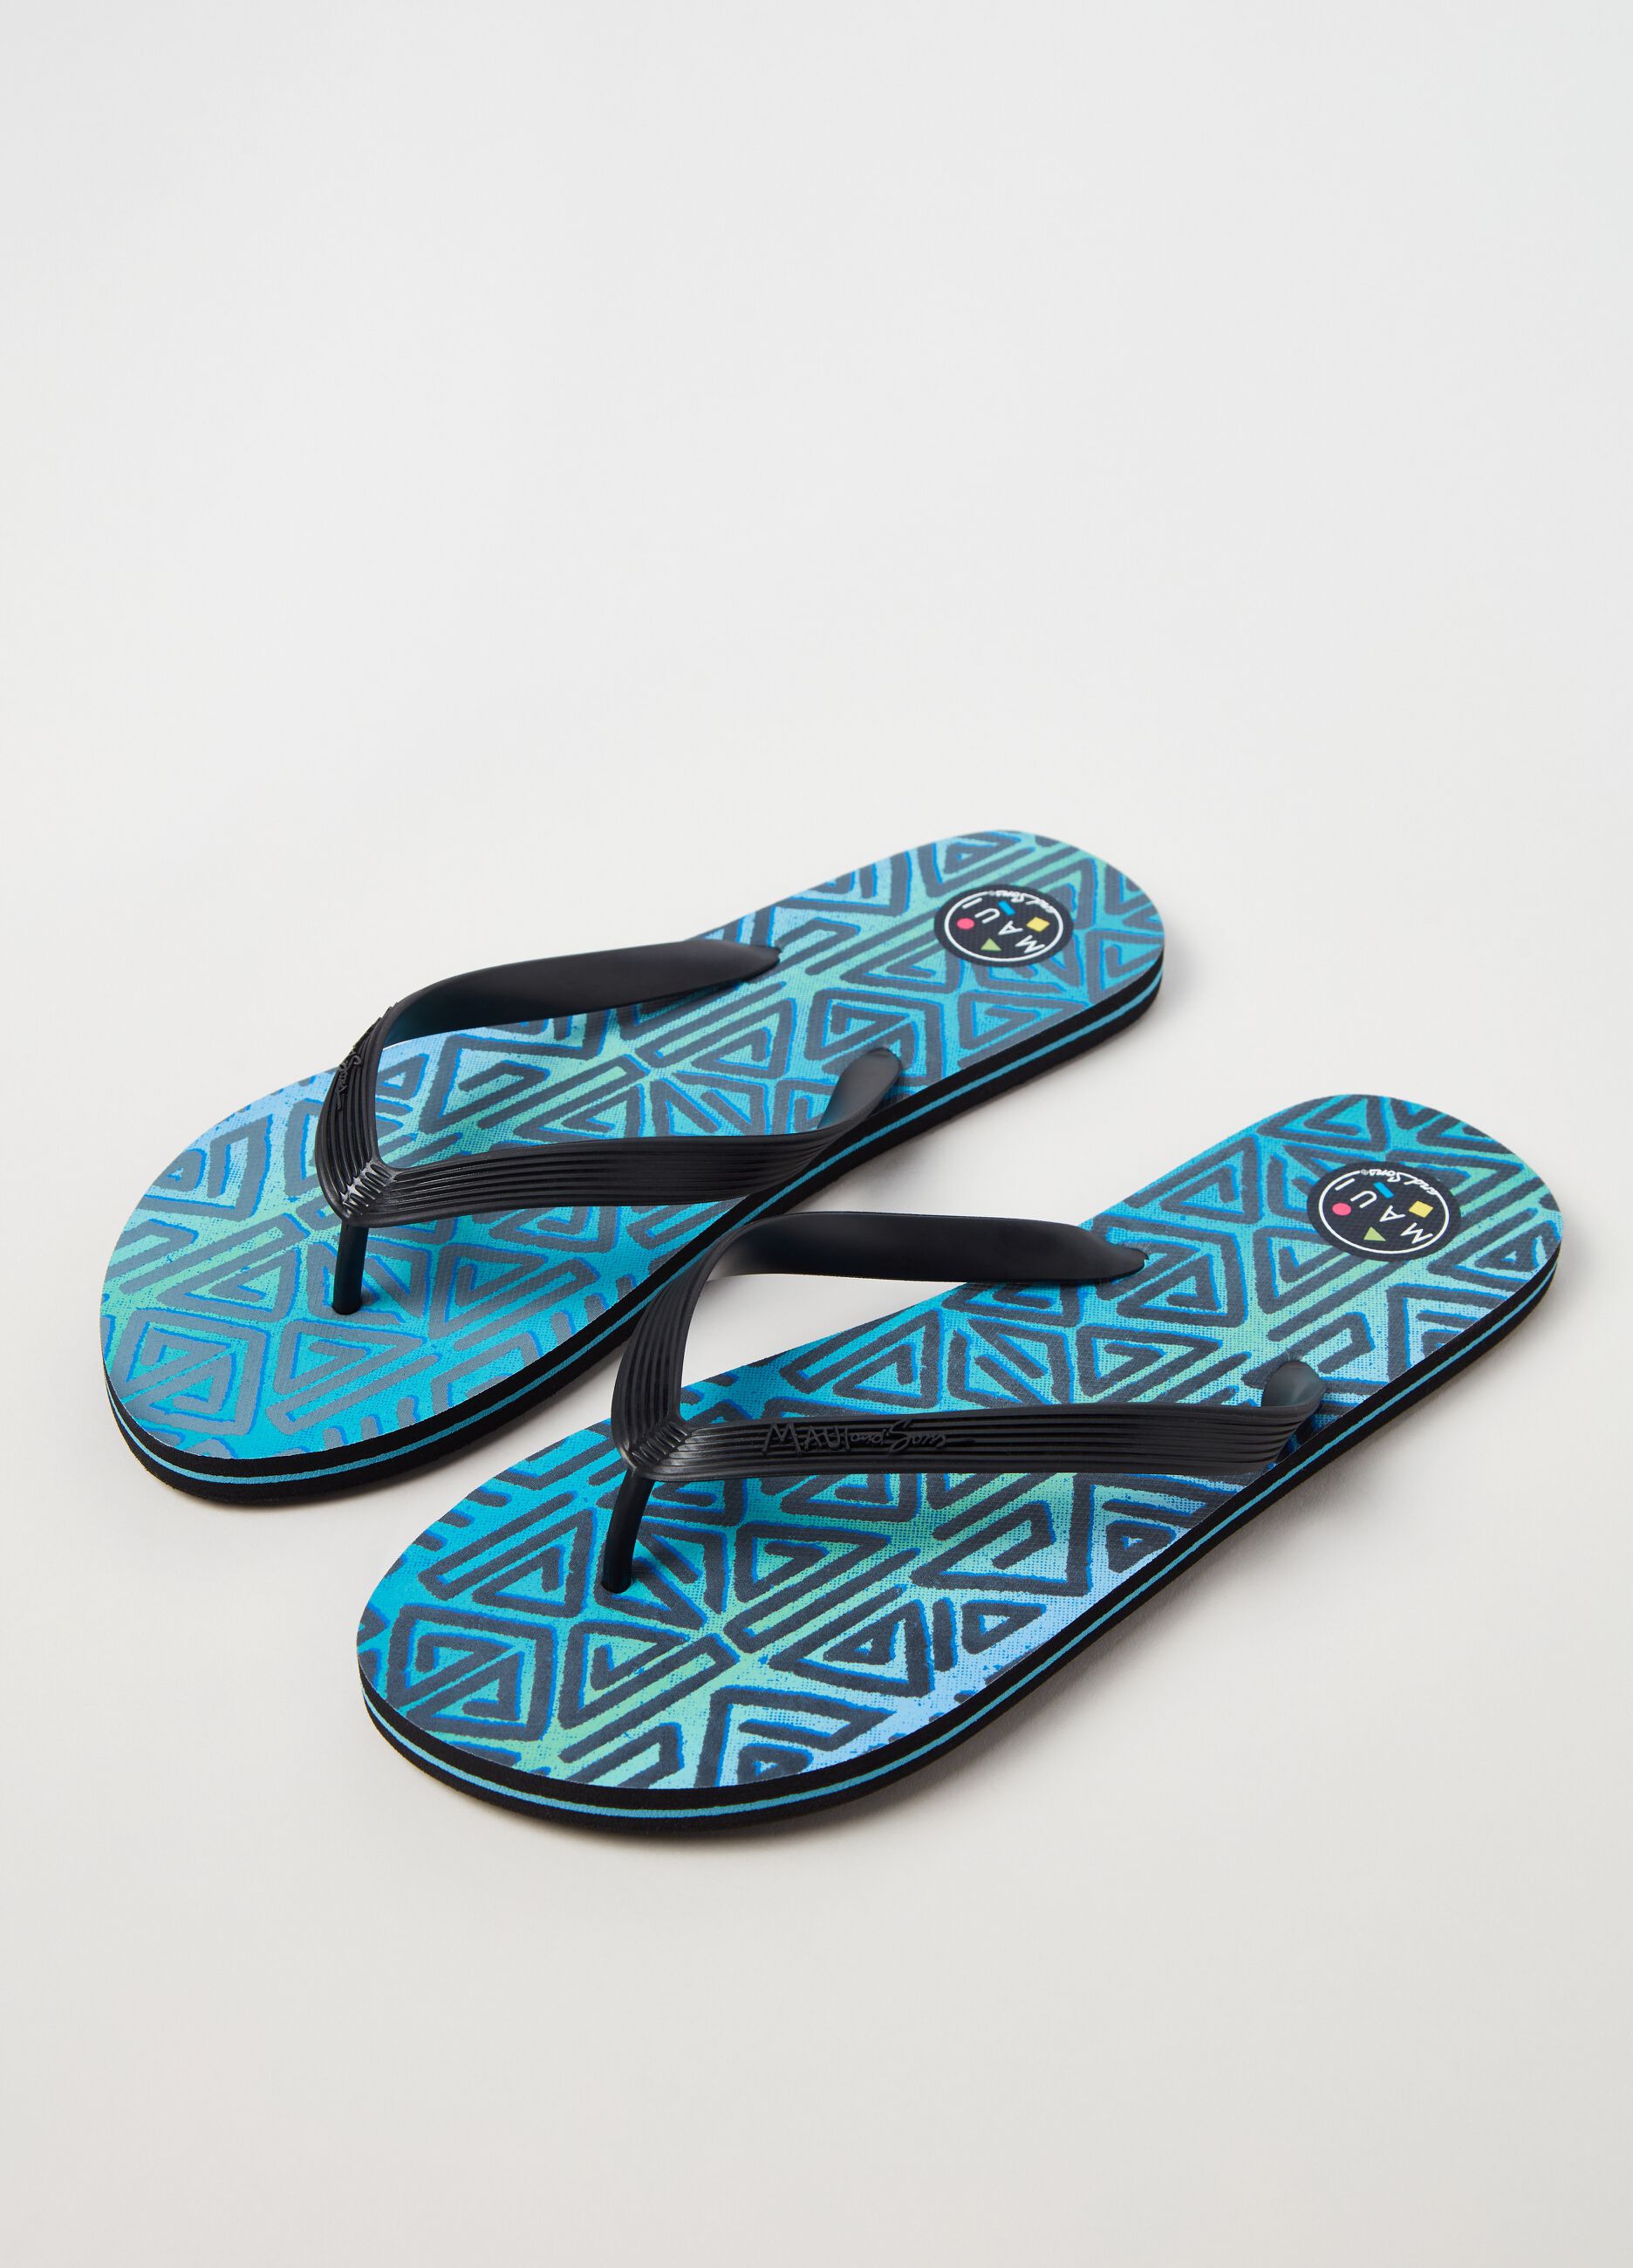 Floral print thong sandal by Maui and Sons